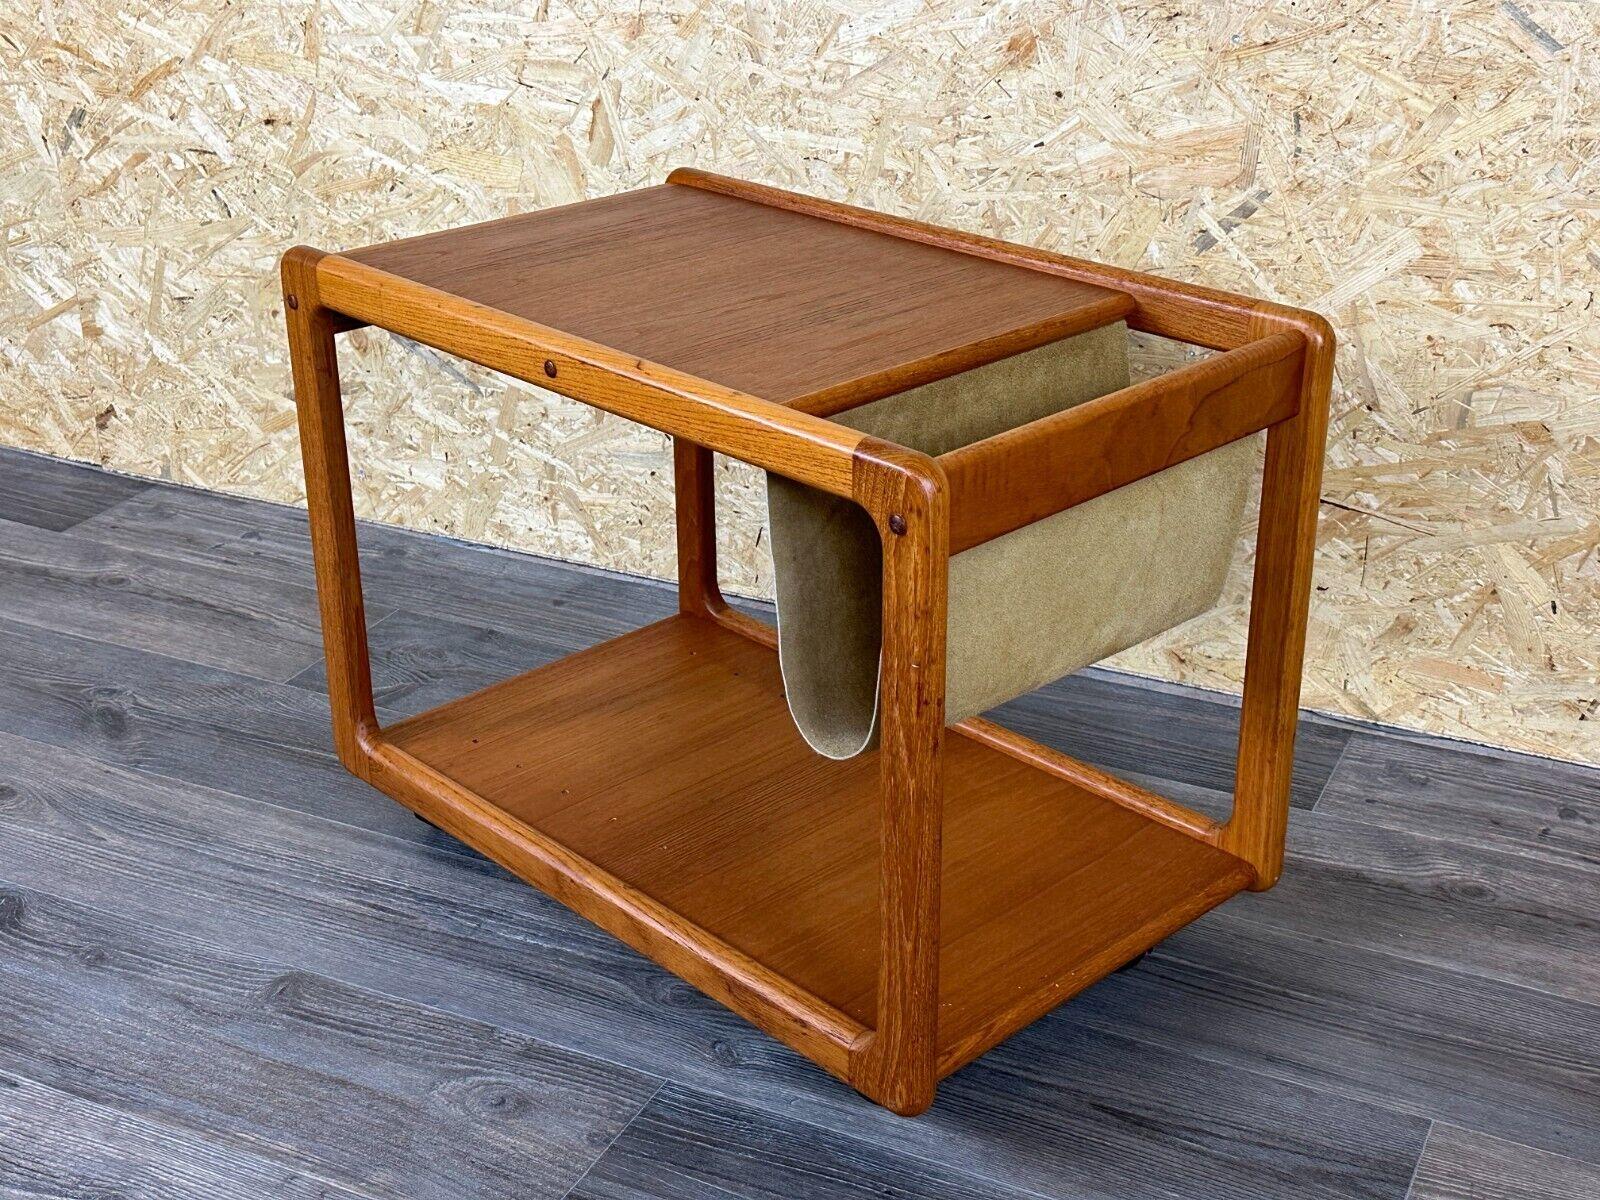 1960s-1970s Teak Table Side Table Newspaper Stand Danish Design, Denmark In Good Condition For Sale In Neuenkirchen, NI